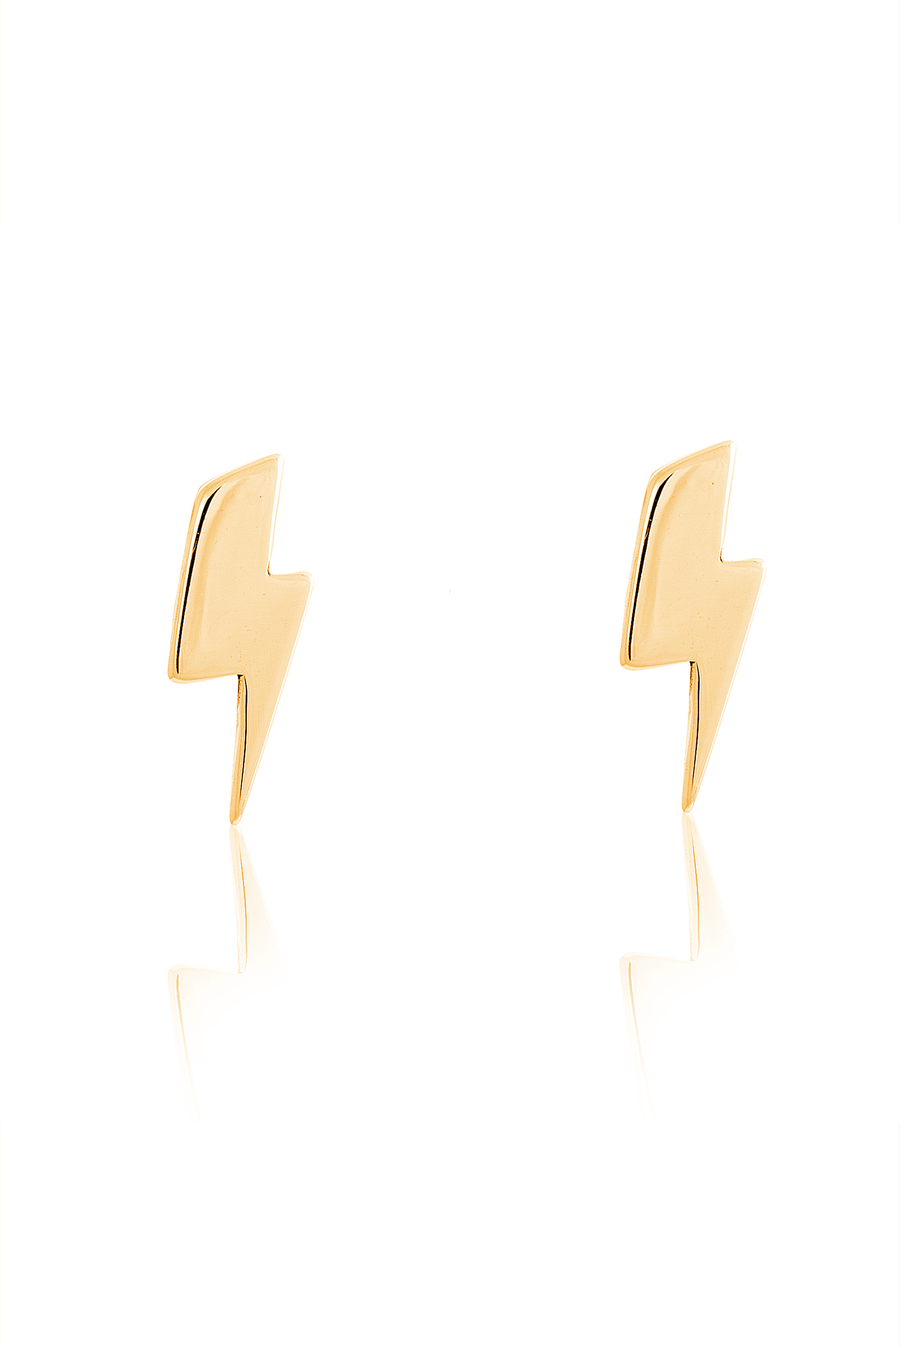 Medium Bowie Bolt Earrings 9ct Yellow Gold - The Collective Dublin